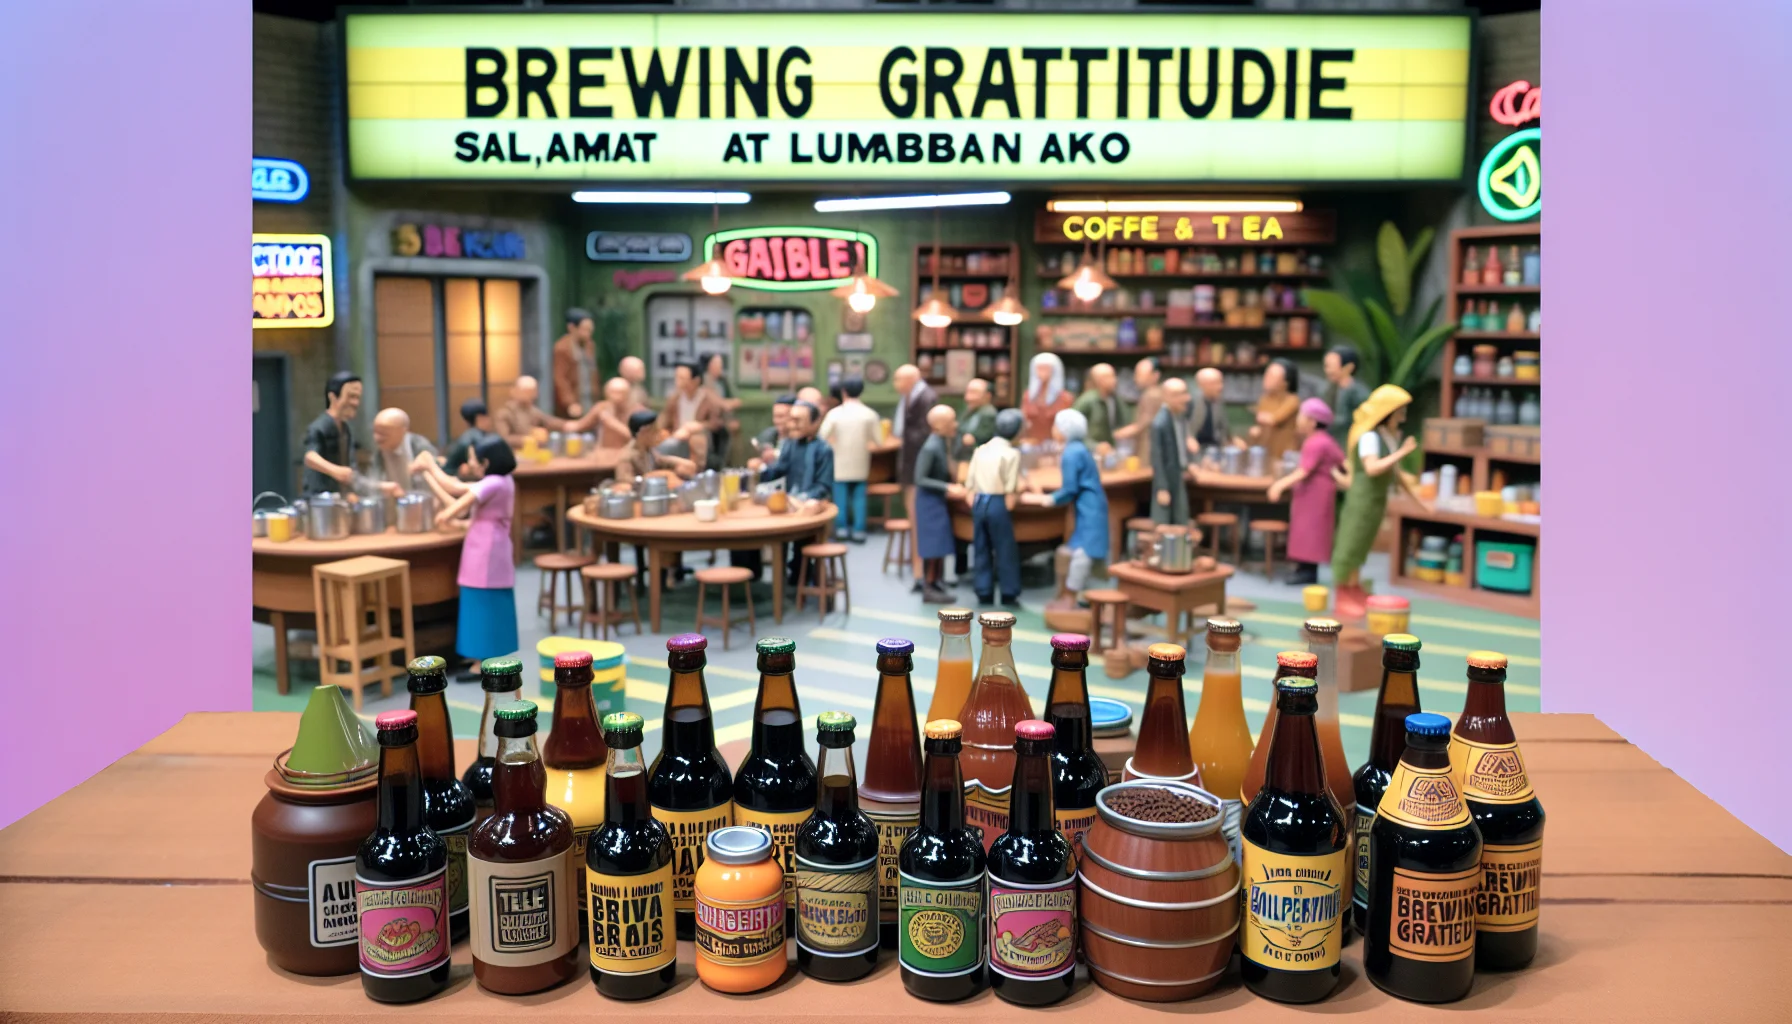 Create a humorous and realistic scenario featuring the concept 'Brewing Gratitude Salamat at Lumaban Ako'. The scene is a lively cafeteria bustling with activity where a variety of enticing tea and coffee brewing processes are being showcased. Bottles of different brews and unique coffee and tea products are in the foreground, featuring ingenious designs and amusing product names. The ambiance is filled with laughter and camaraderie, reflecting the spirit of brewing gratitude.